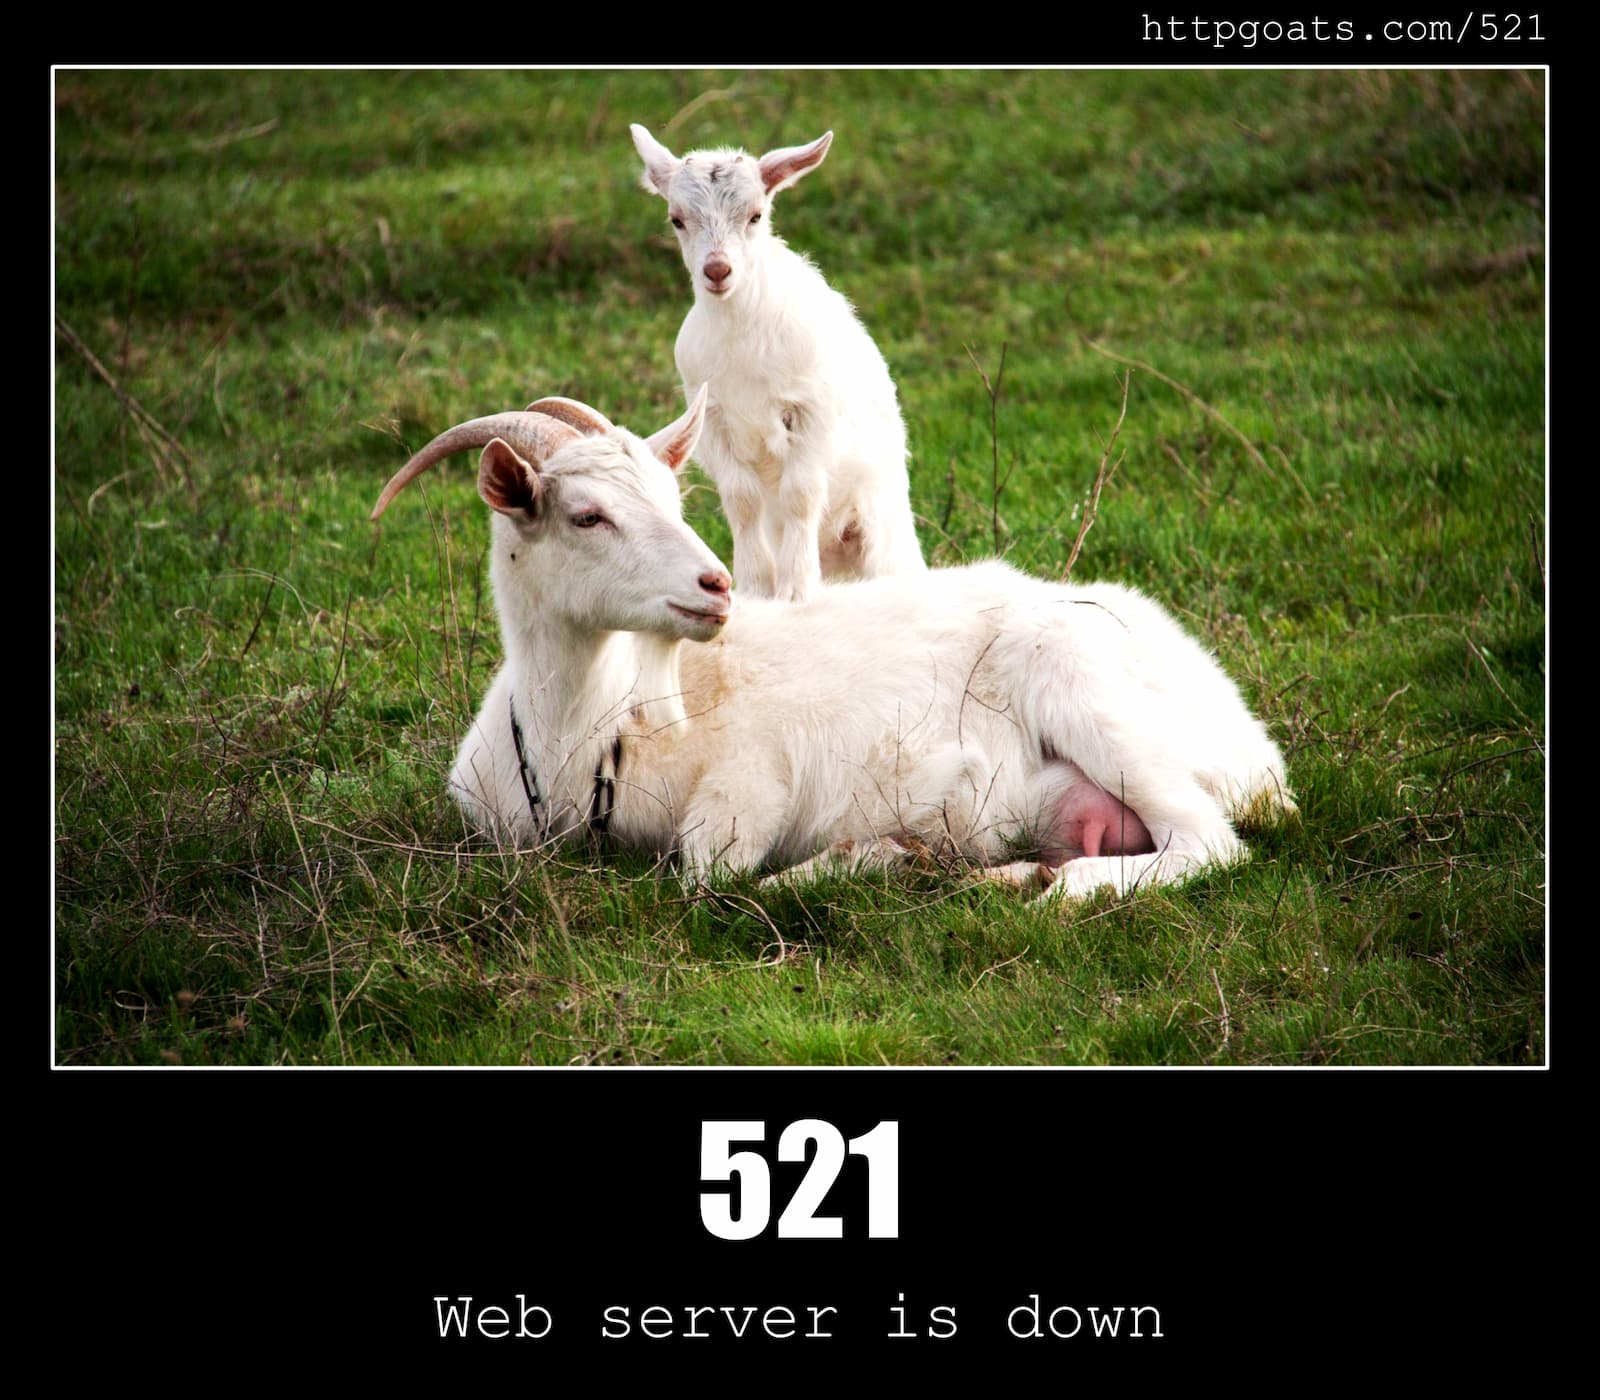 HTTP Status Code 521 Web server is down & Goats